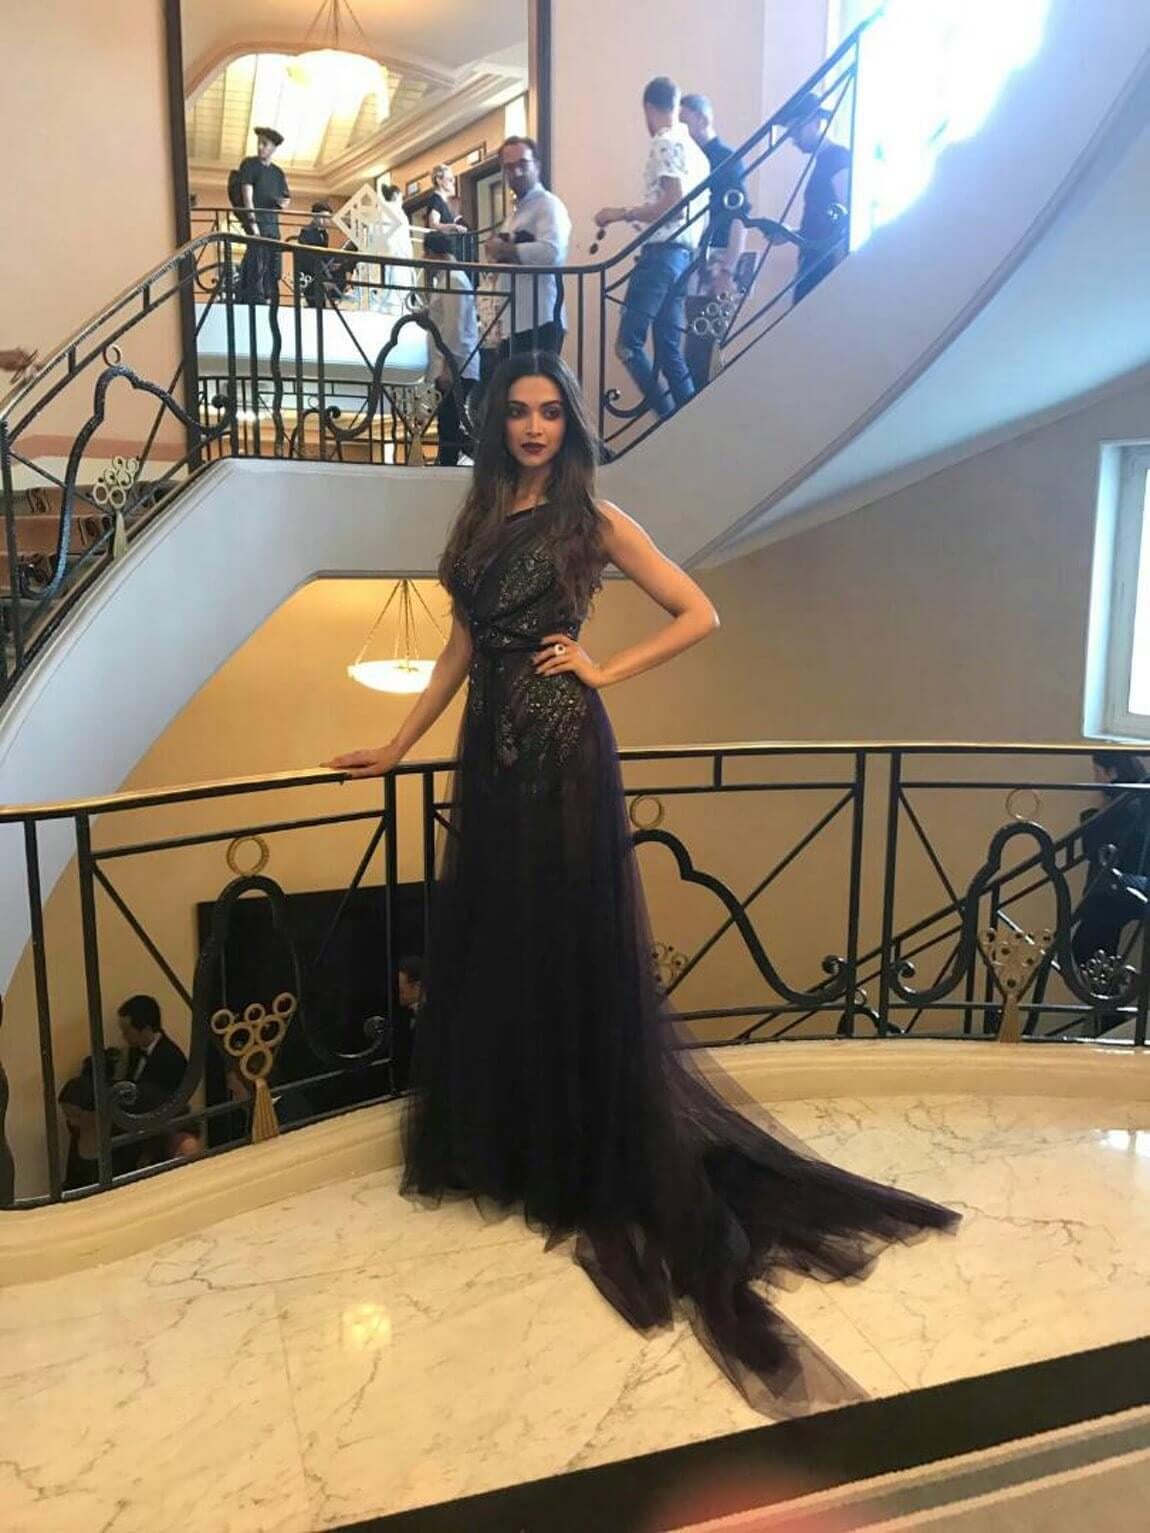 thequint%2F2017-05%2F966cd86e-49ee-4066-b9ce-3315bb4145d6%2FFirst Look - Deepika Padukone at the Cannes Film Festival 2017 (4) (1)